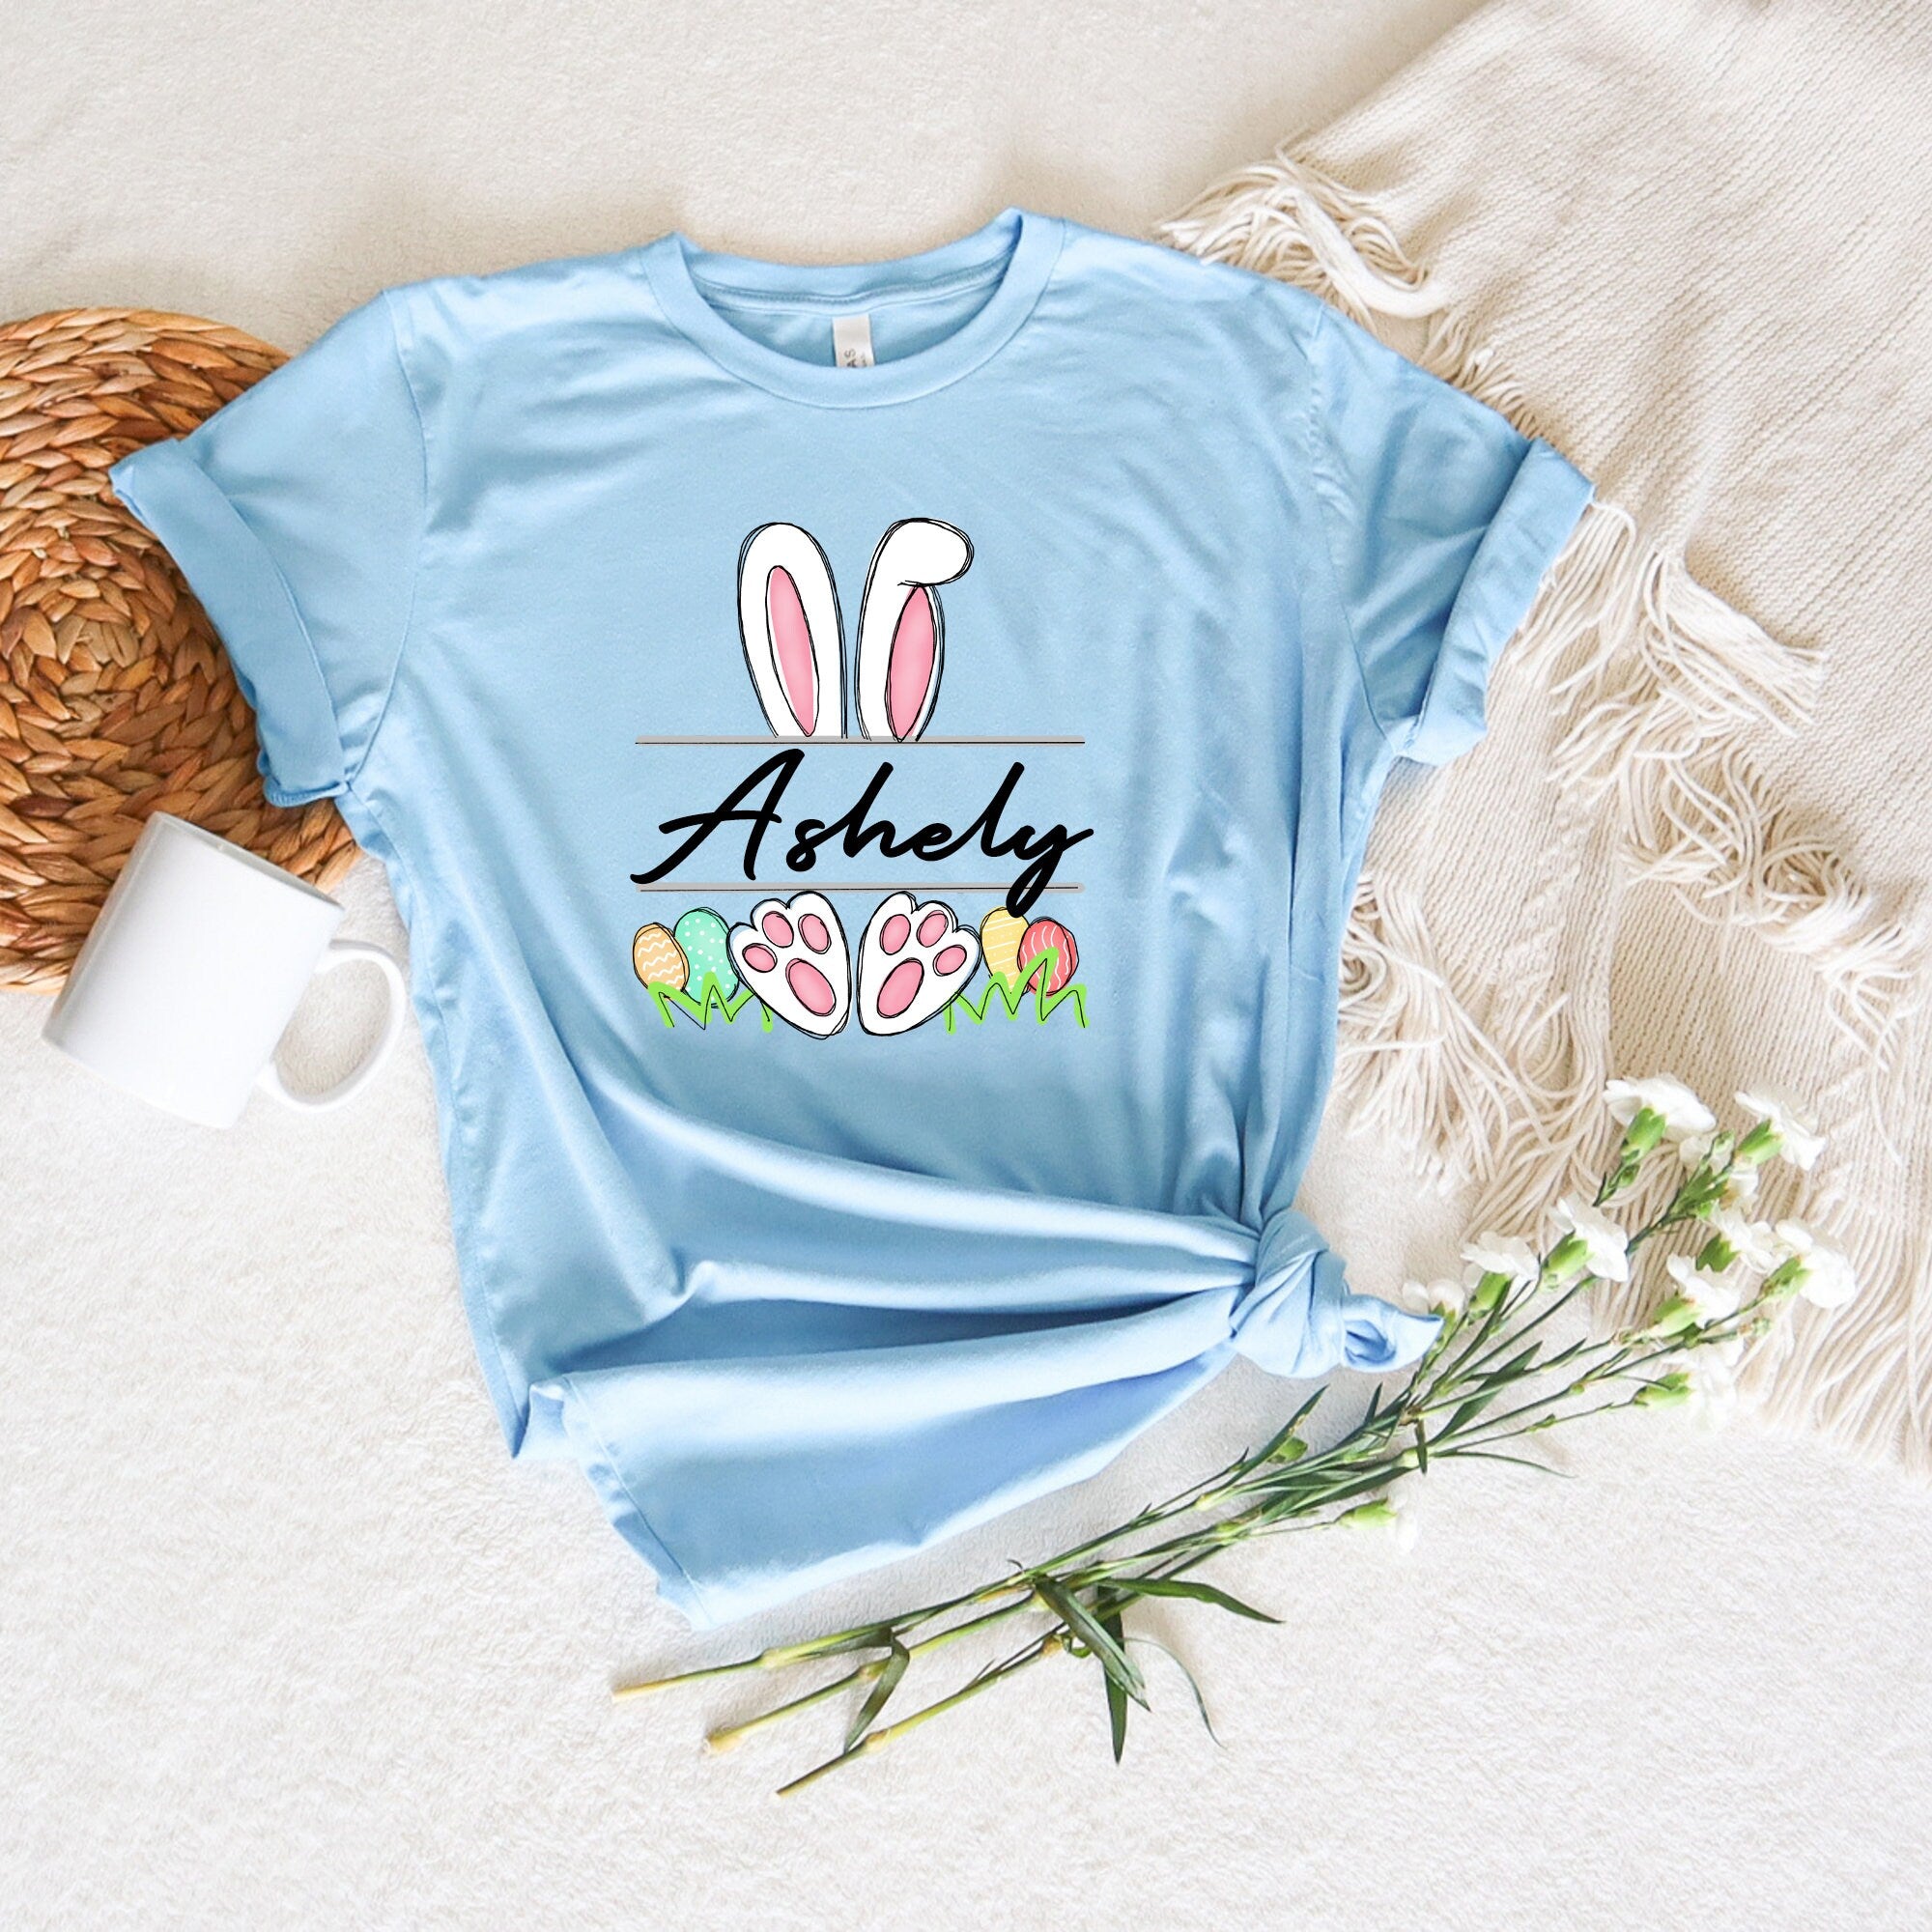 Custom Name Easter Shirts, Easter Shirts, Easter Bunny Name Shirt, Easter Bunny Shirt, Personalized Gifts, Easter Shirt